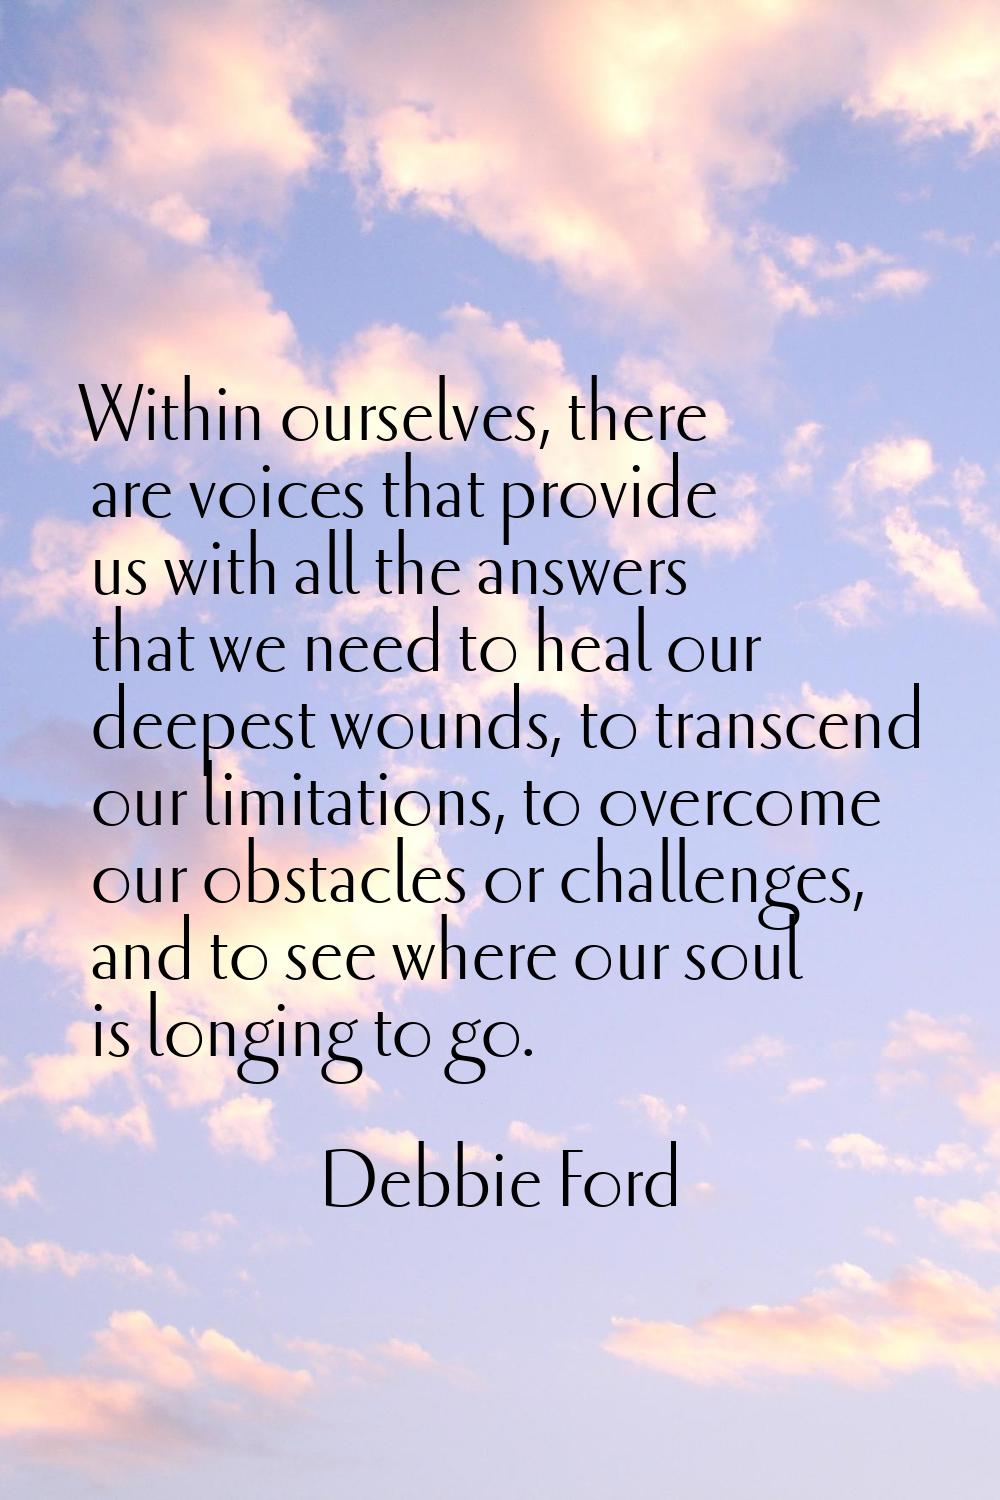 Within ourselves, there are voices that provide us with all the answers that we need to heal our de